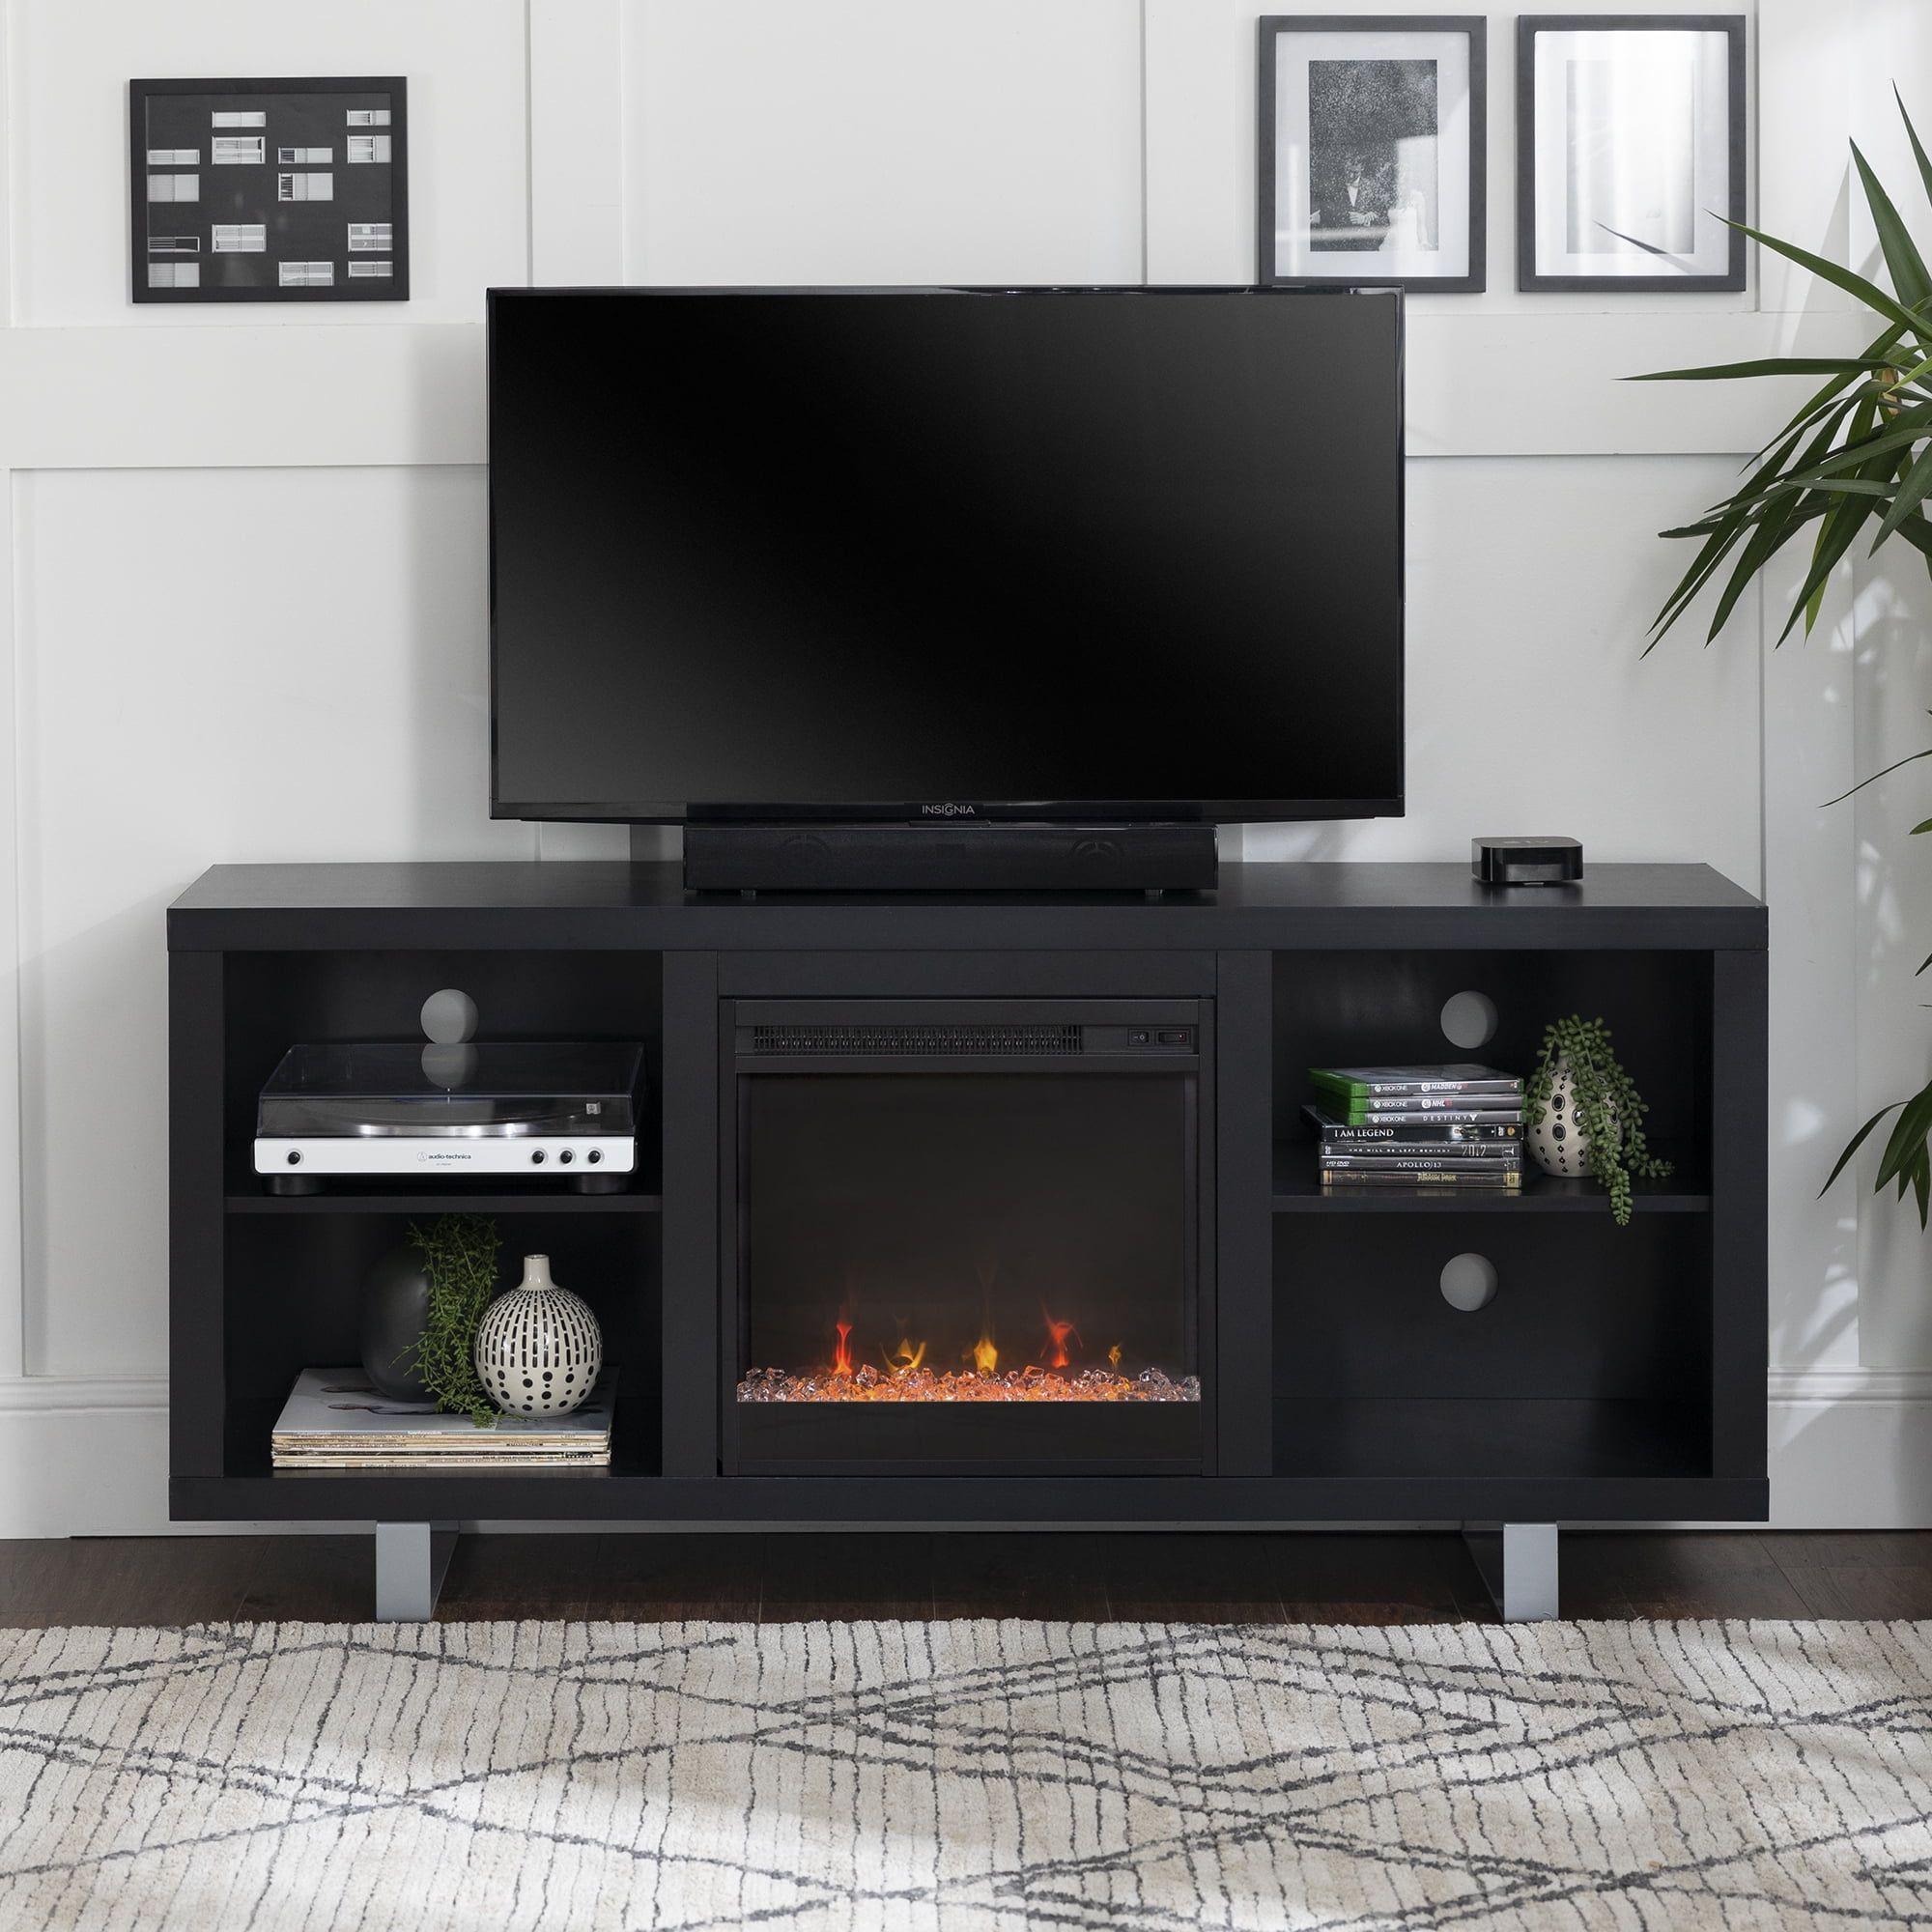 Manor Park Modern Fireplace Tv Stand For Tvs Up To 64", Black – Walmart In Modern Fireplace Tv Stands (Gallery 16 of 20)